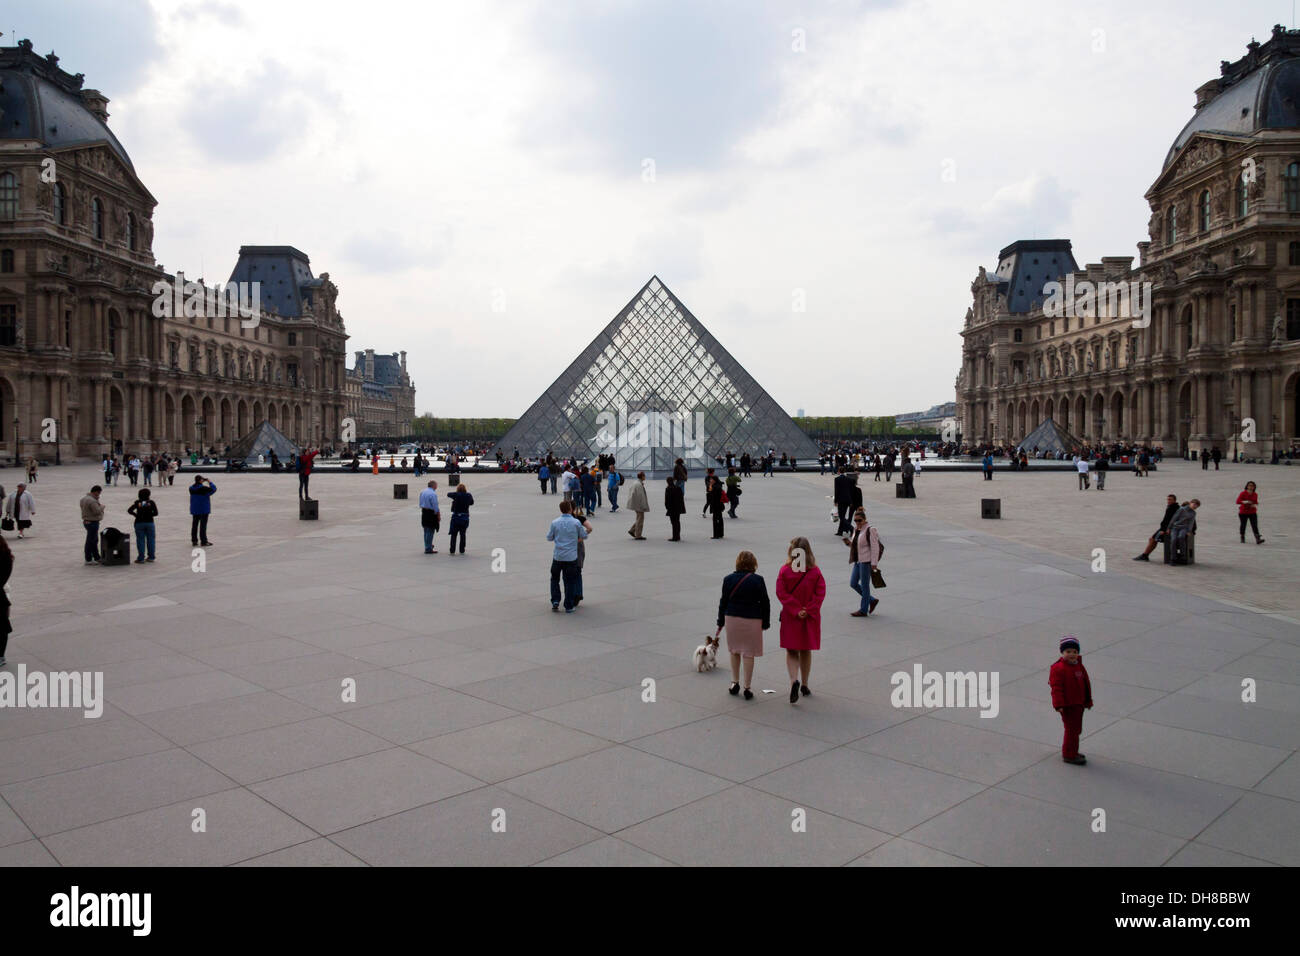 The Glass Pyramid of the Louvre Museum in Paris, France Stock Photo